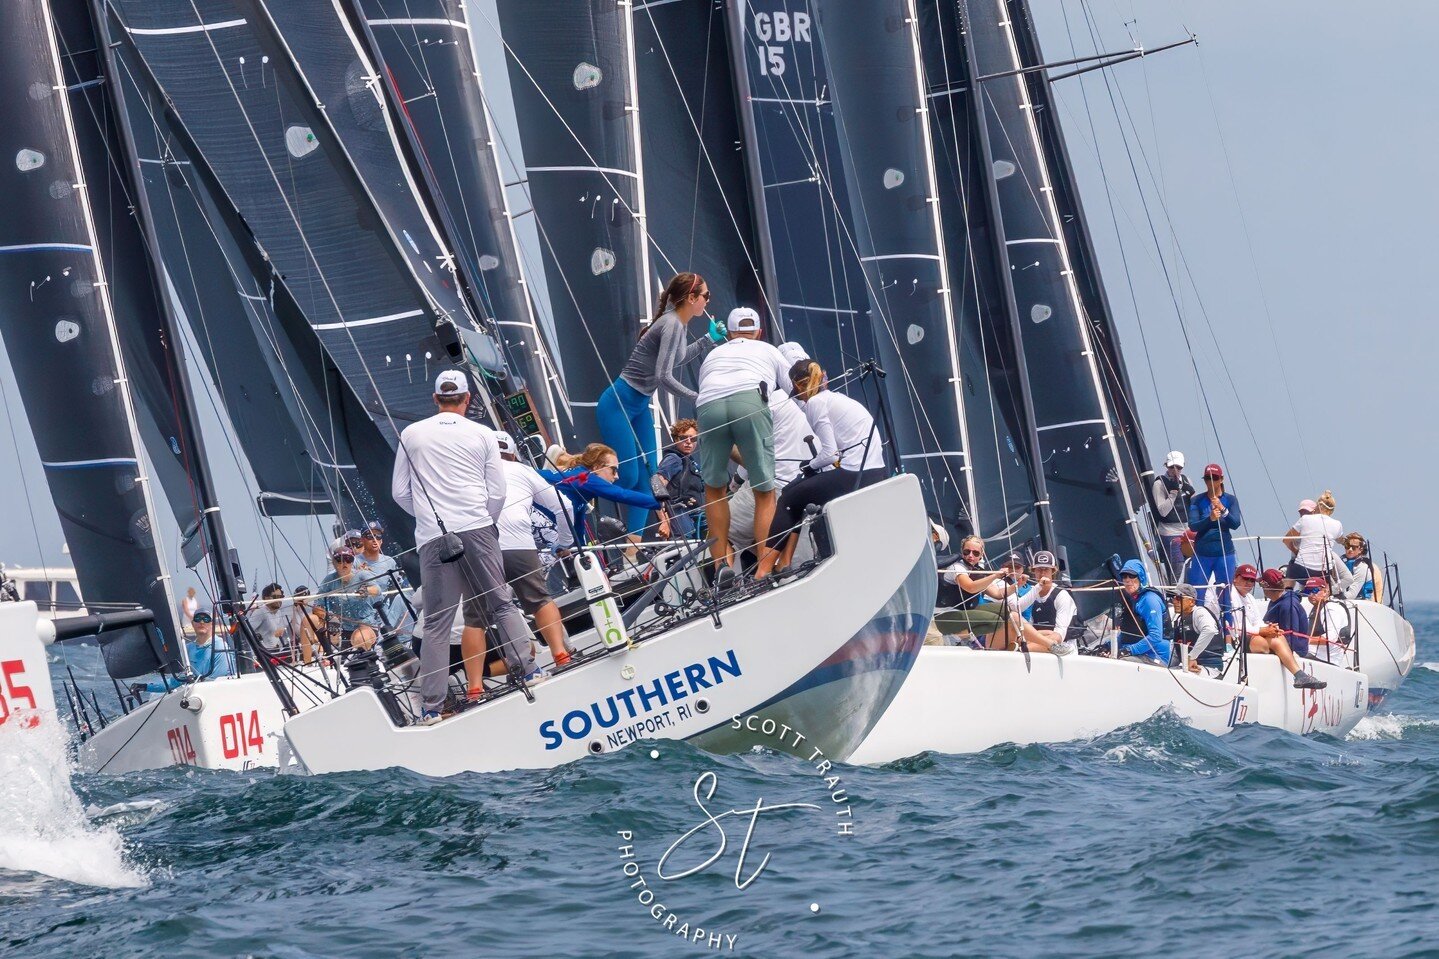 #transomtuesday during day 2 of the 2023 #ic37class National Championship.
Pictured is &quot;Southern&quot; - USA 003 heading into the thick of things with just over a minute to go until the start of race 5. John Lovell and team from @southernyc  in 